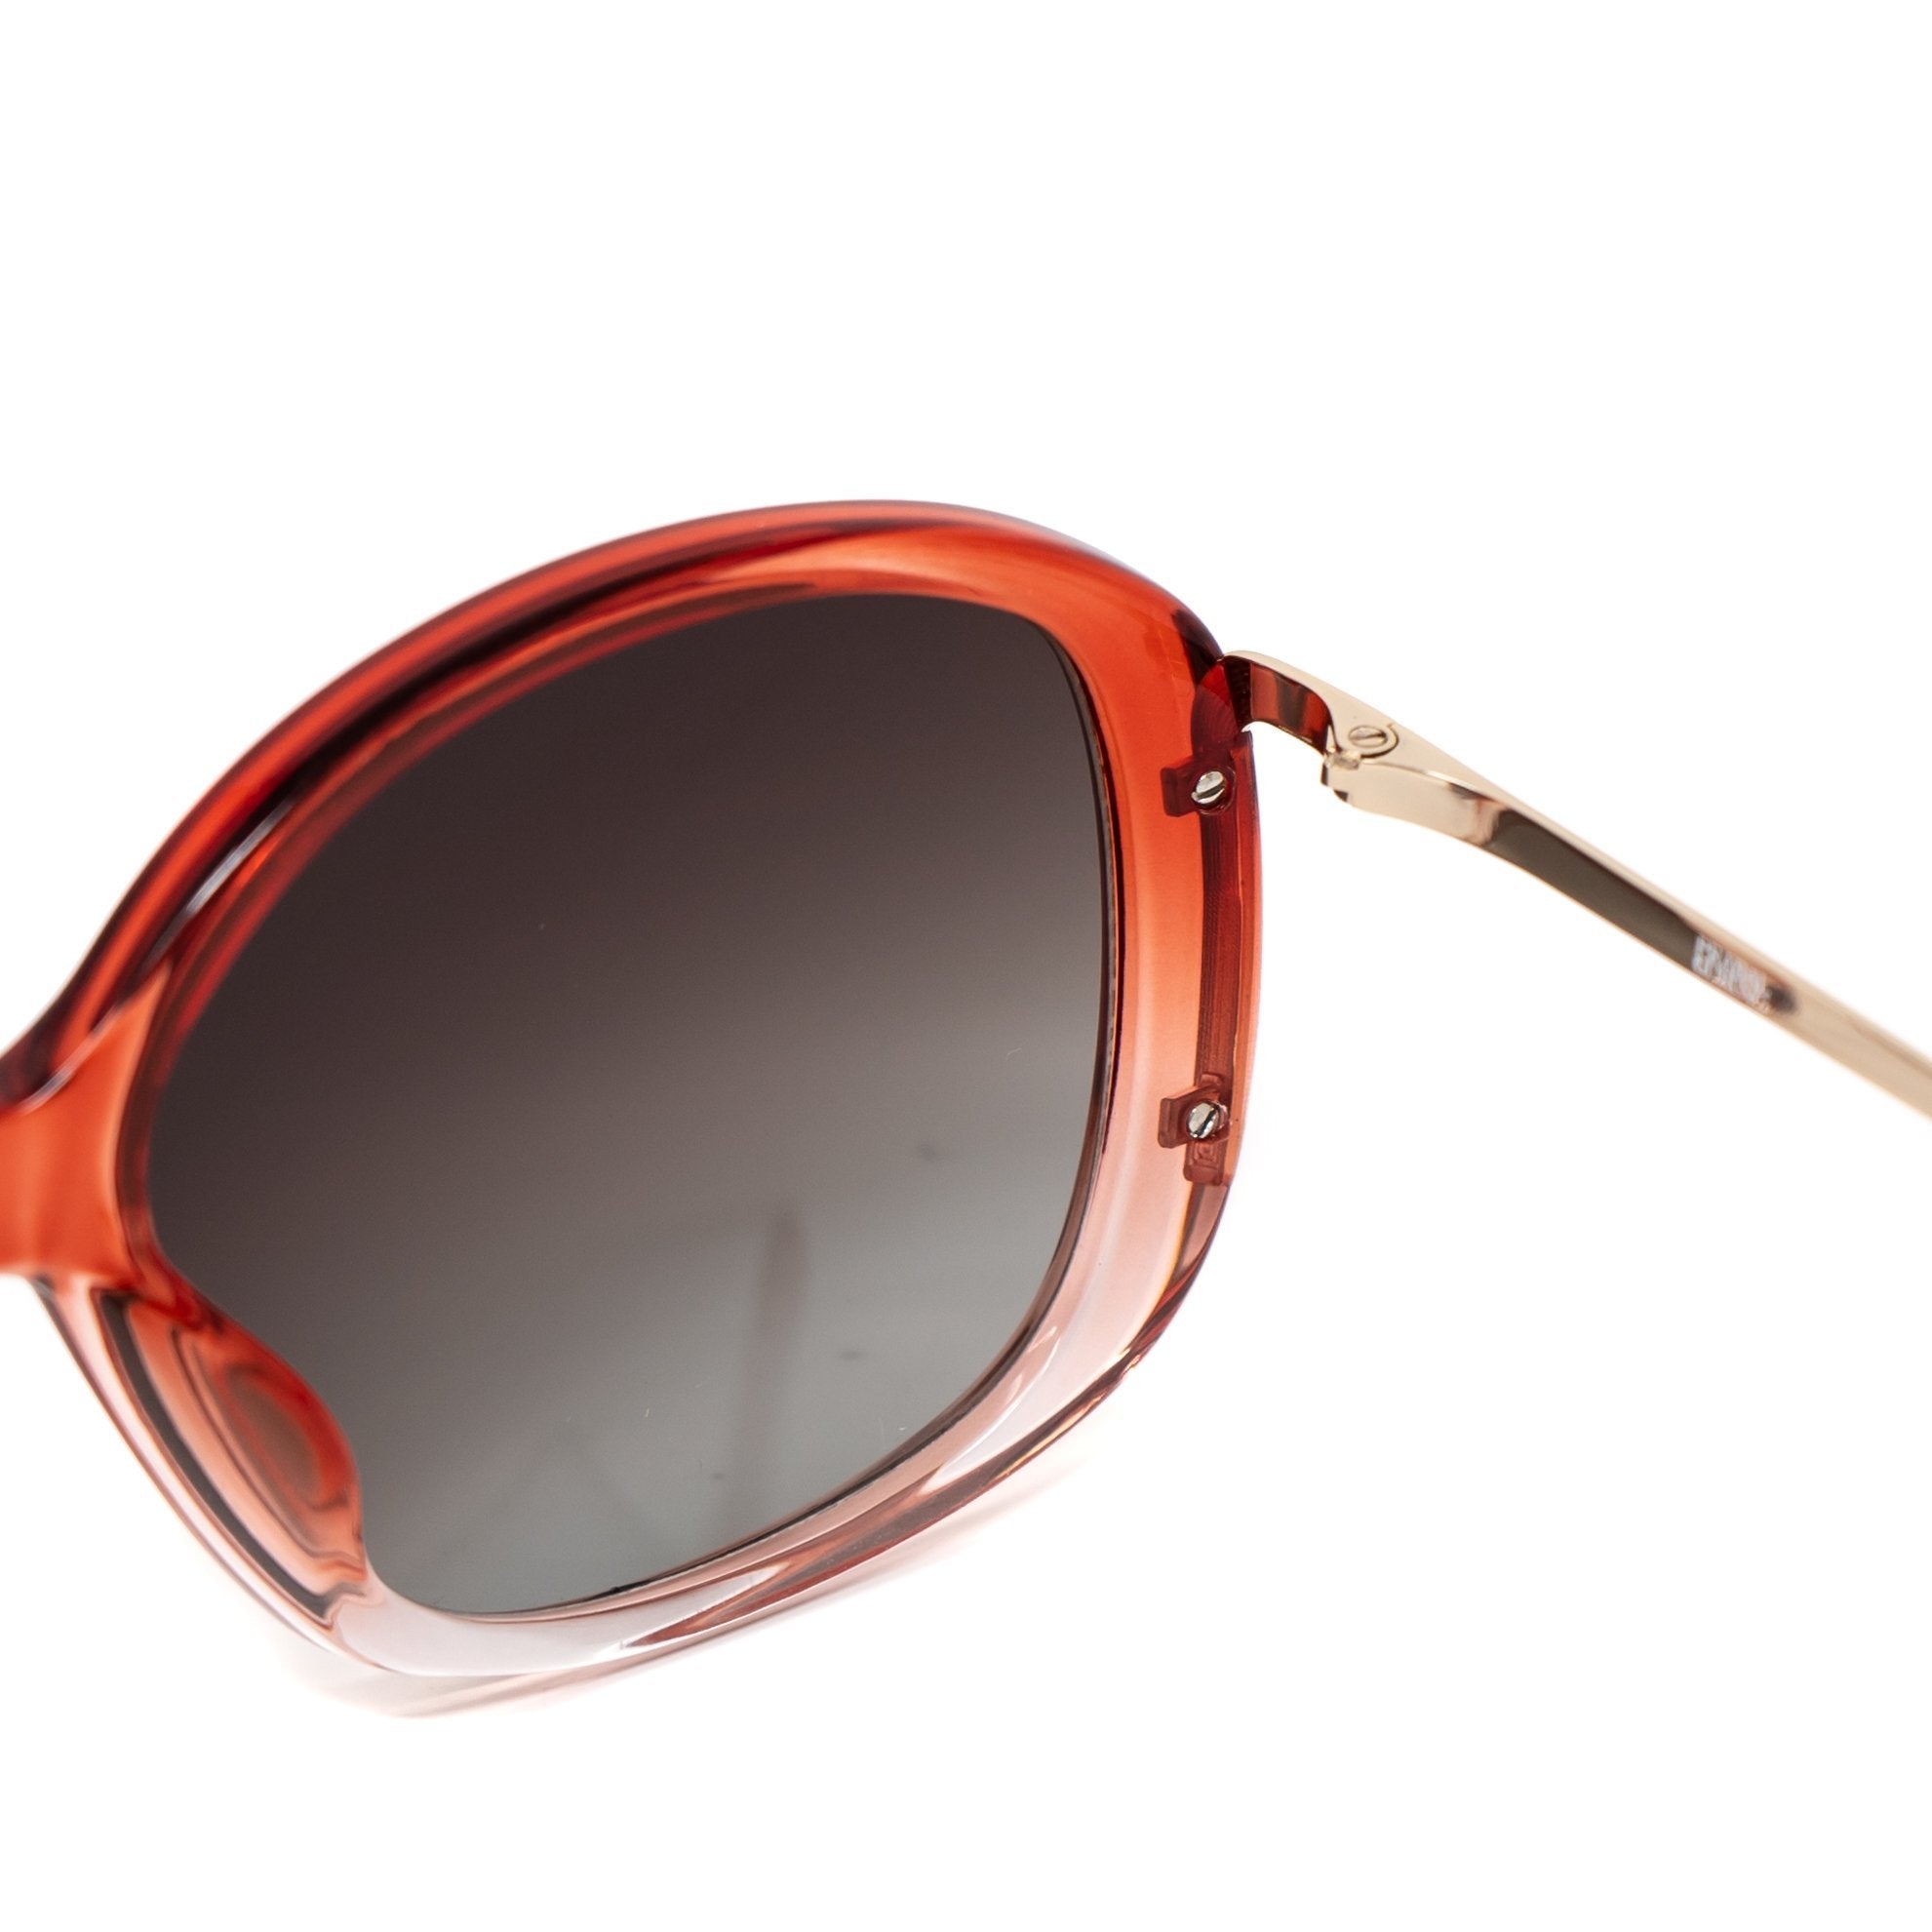 Prabal Gurung Sunglasses Oversized Female Red to Clear/Light Gold Frame Category 3 Grey Graduated Lenses PG23C2SUN - Watches & Crystals